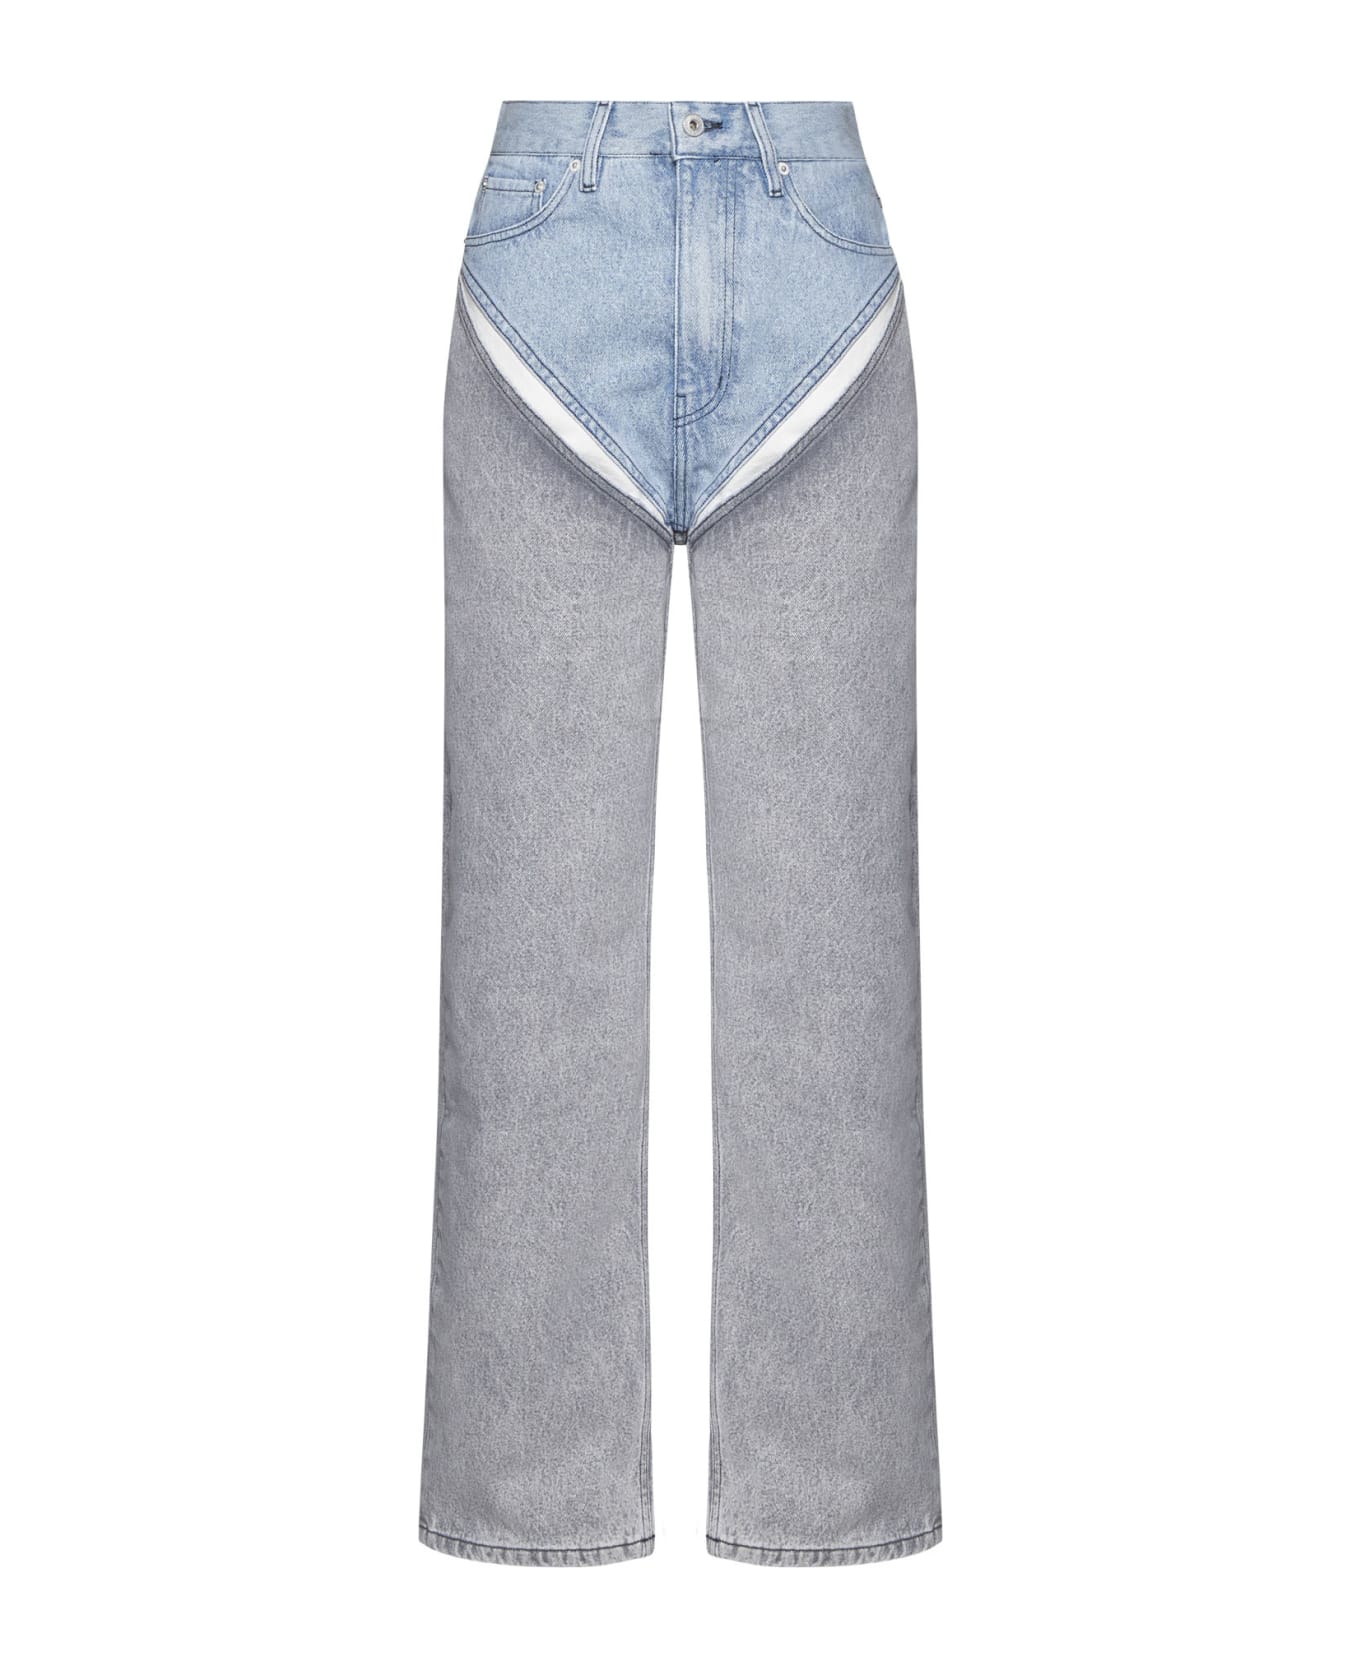 Y/Project Jeans - Ice blue/grey デニム